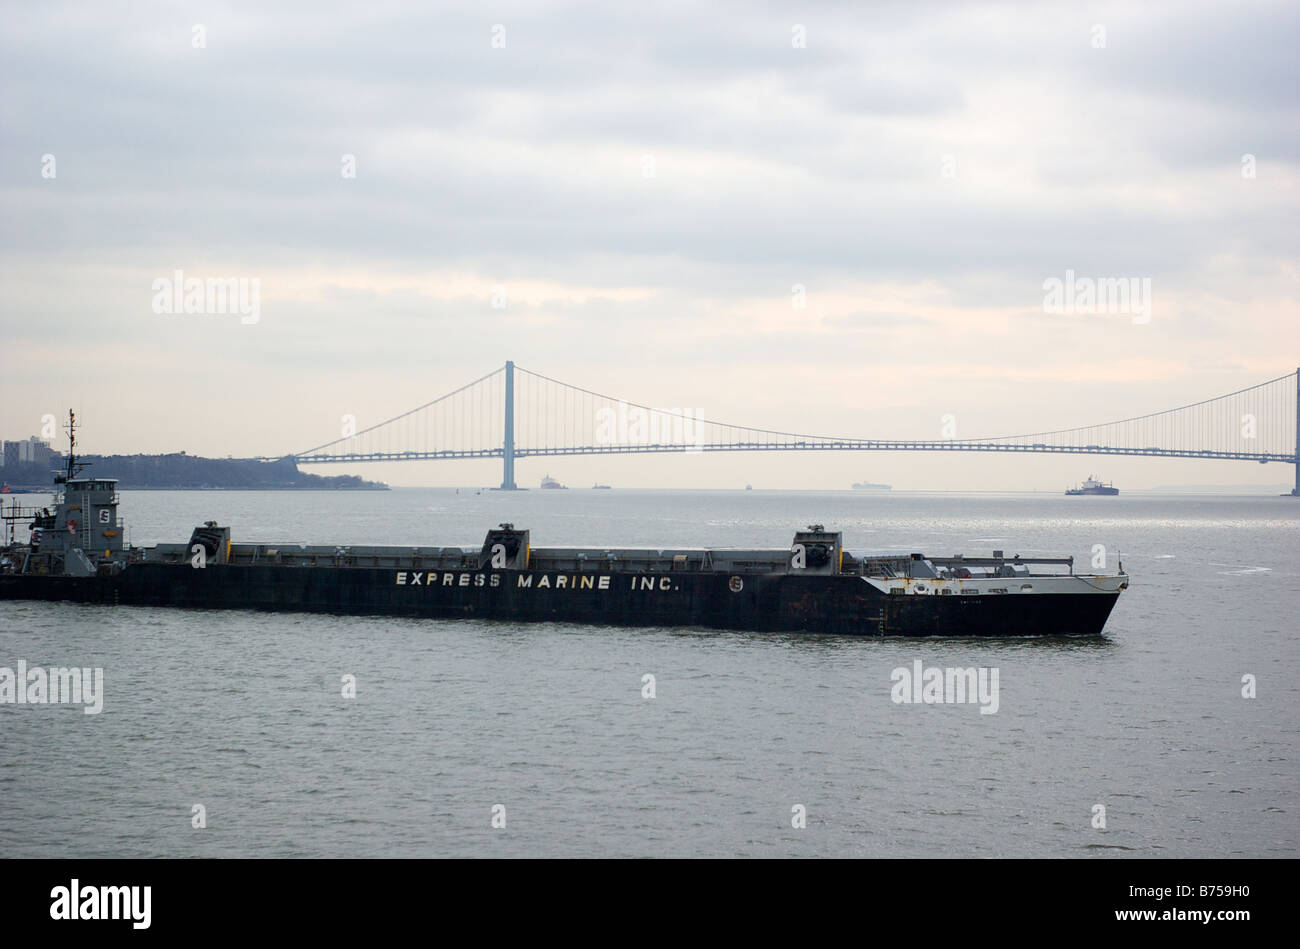 Verrazano Narrows Bridge and Express Marine Barge in Upper New York Bay USA (For Editorial Use Only) Stock Photo